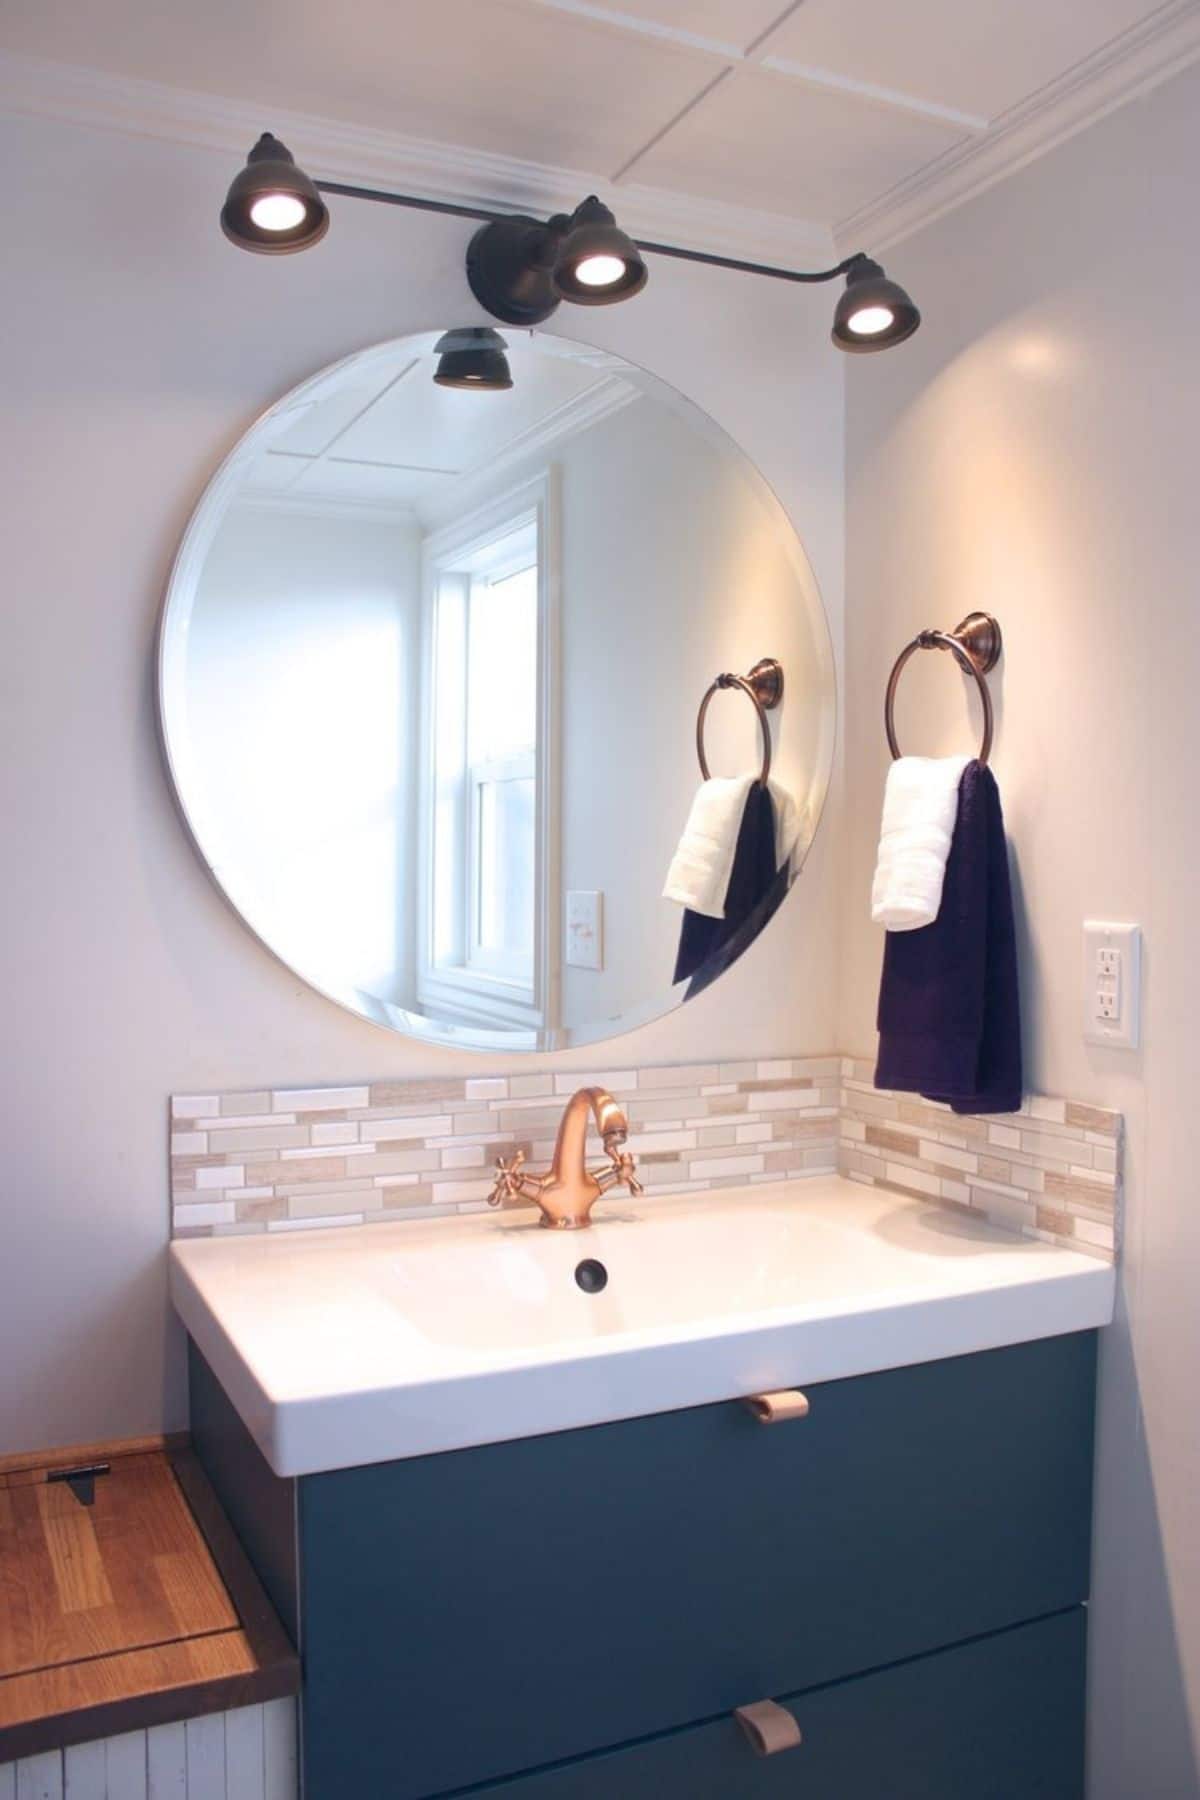 Teal vanity with white sink and round mirror on wall above